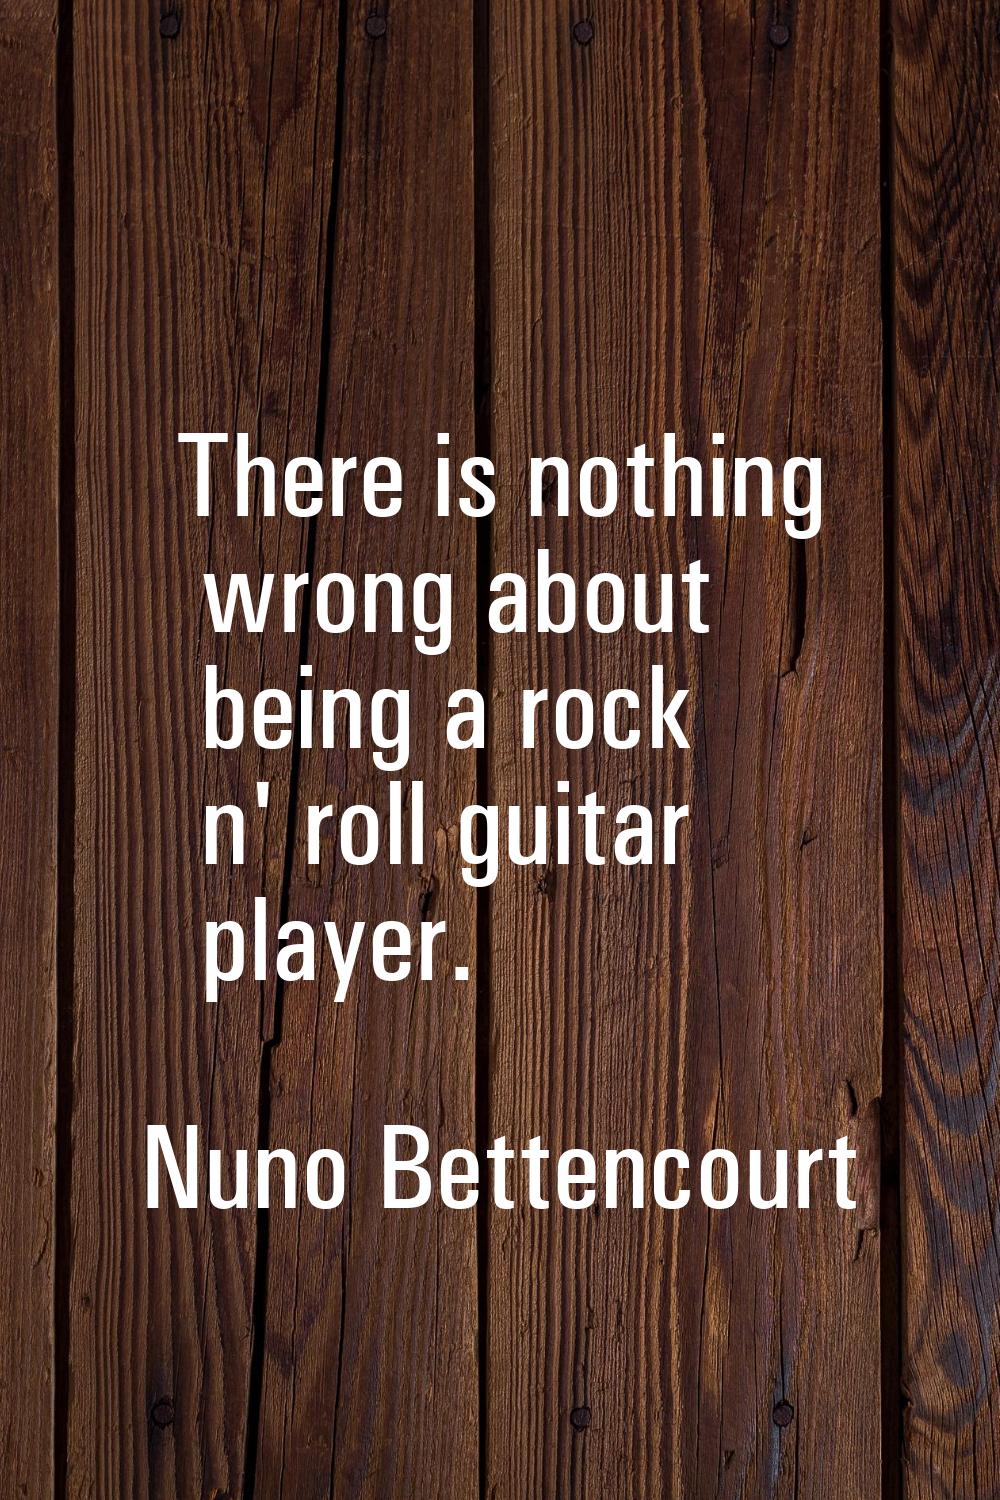 There is nothing wrong about being a rock n' roll guitar player.